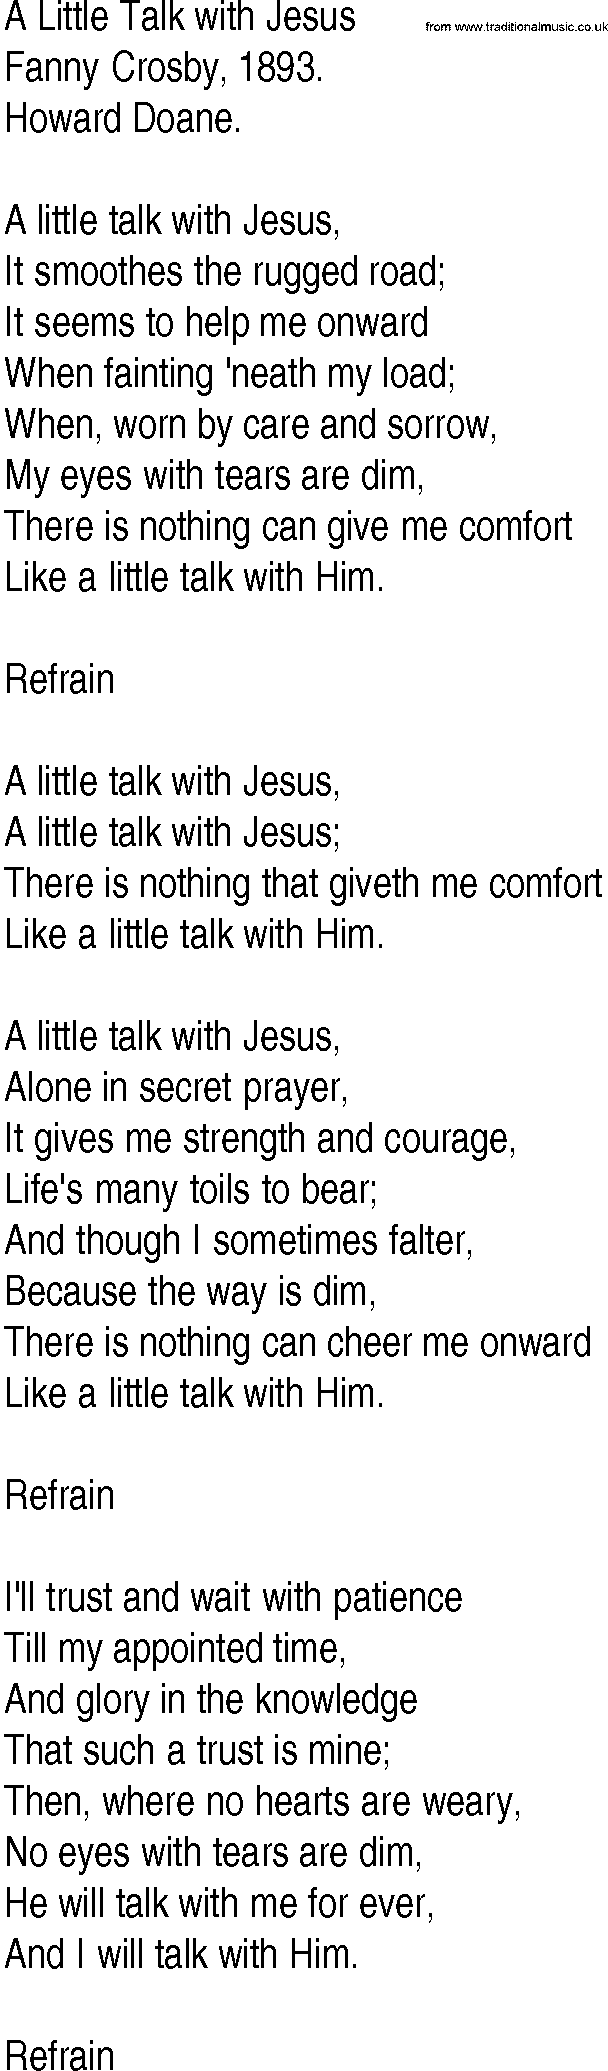 Hymn and Gospel Song: A Little Talk with Jesus by Fanny Crosby lyrics